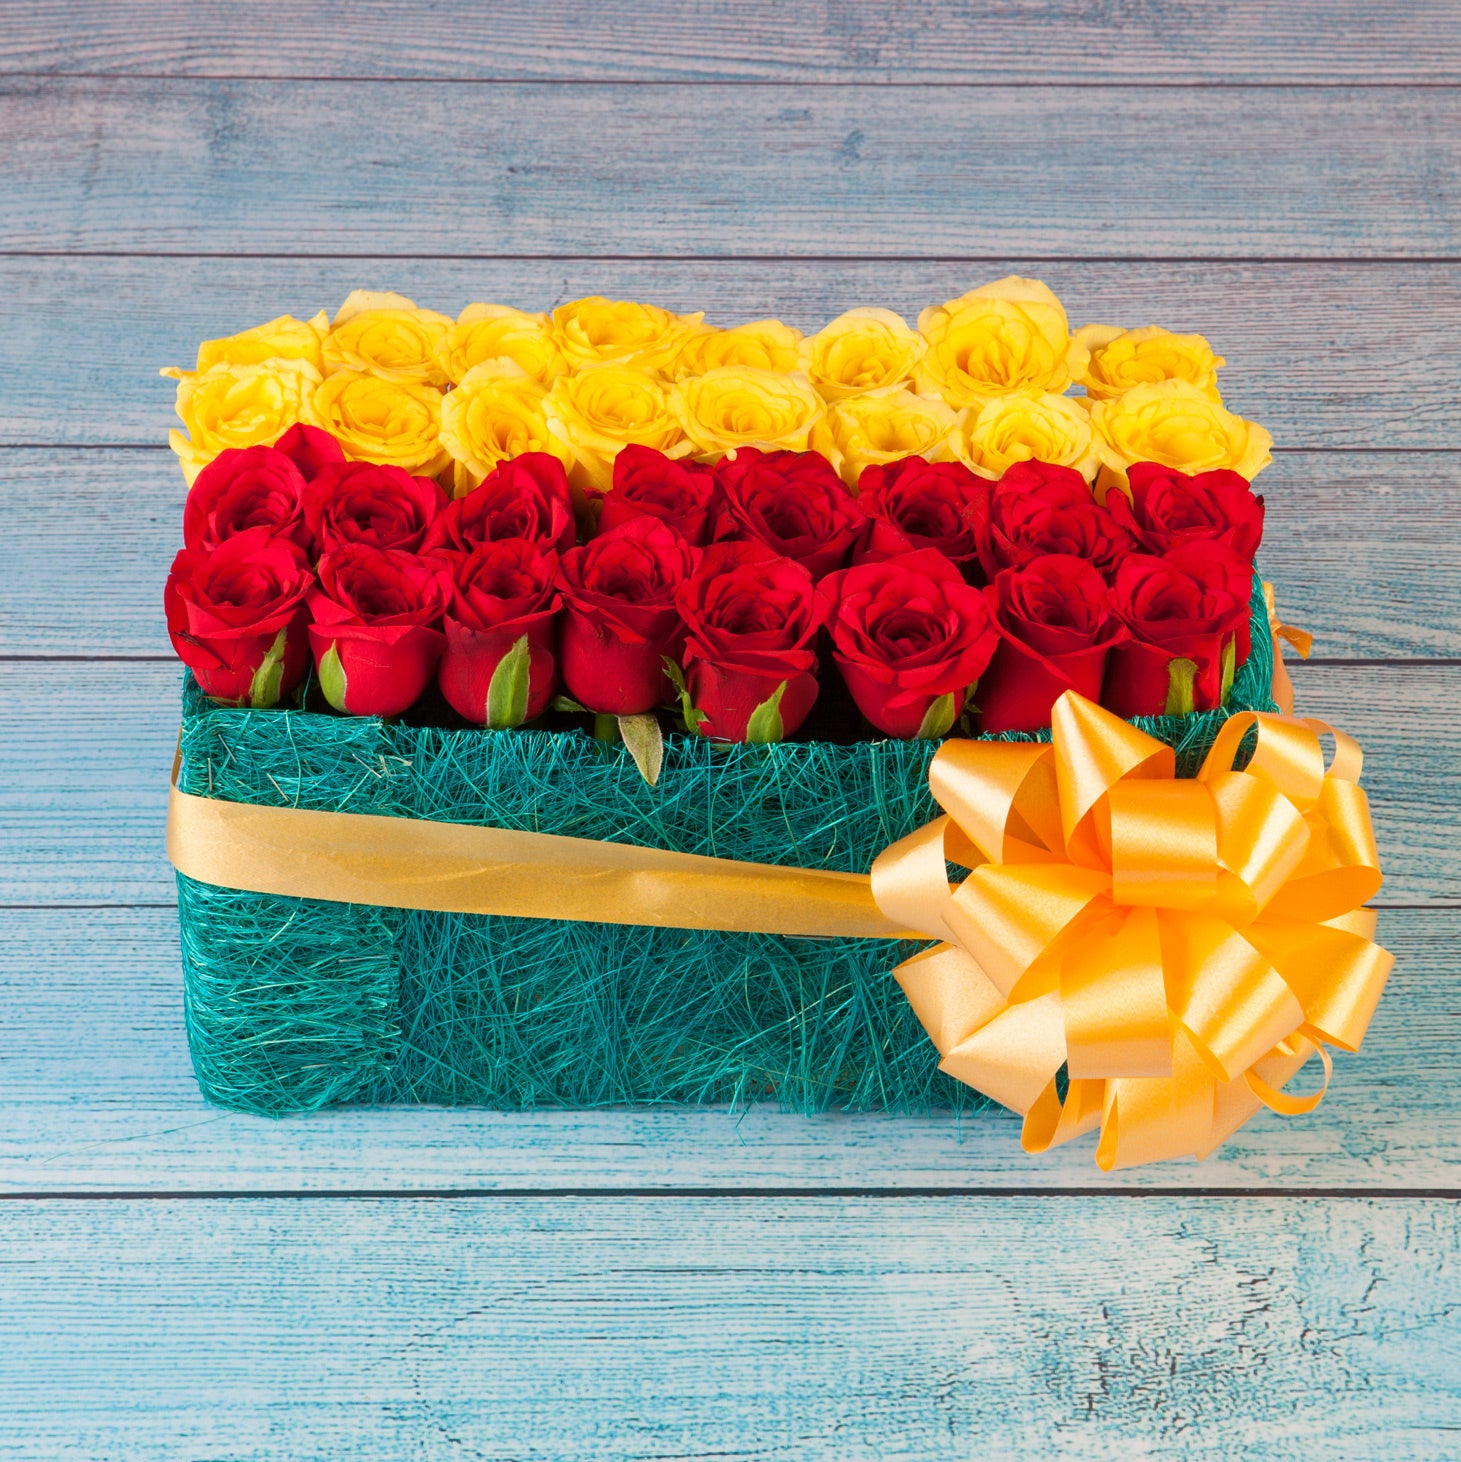 Bed Of Roses Online Flowers Delivery in Pune & Mumbai